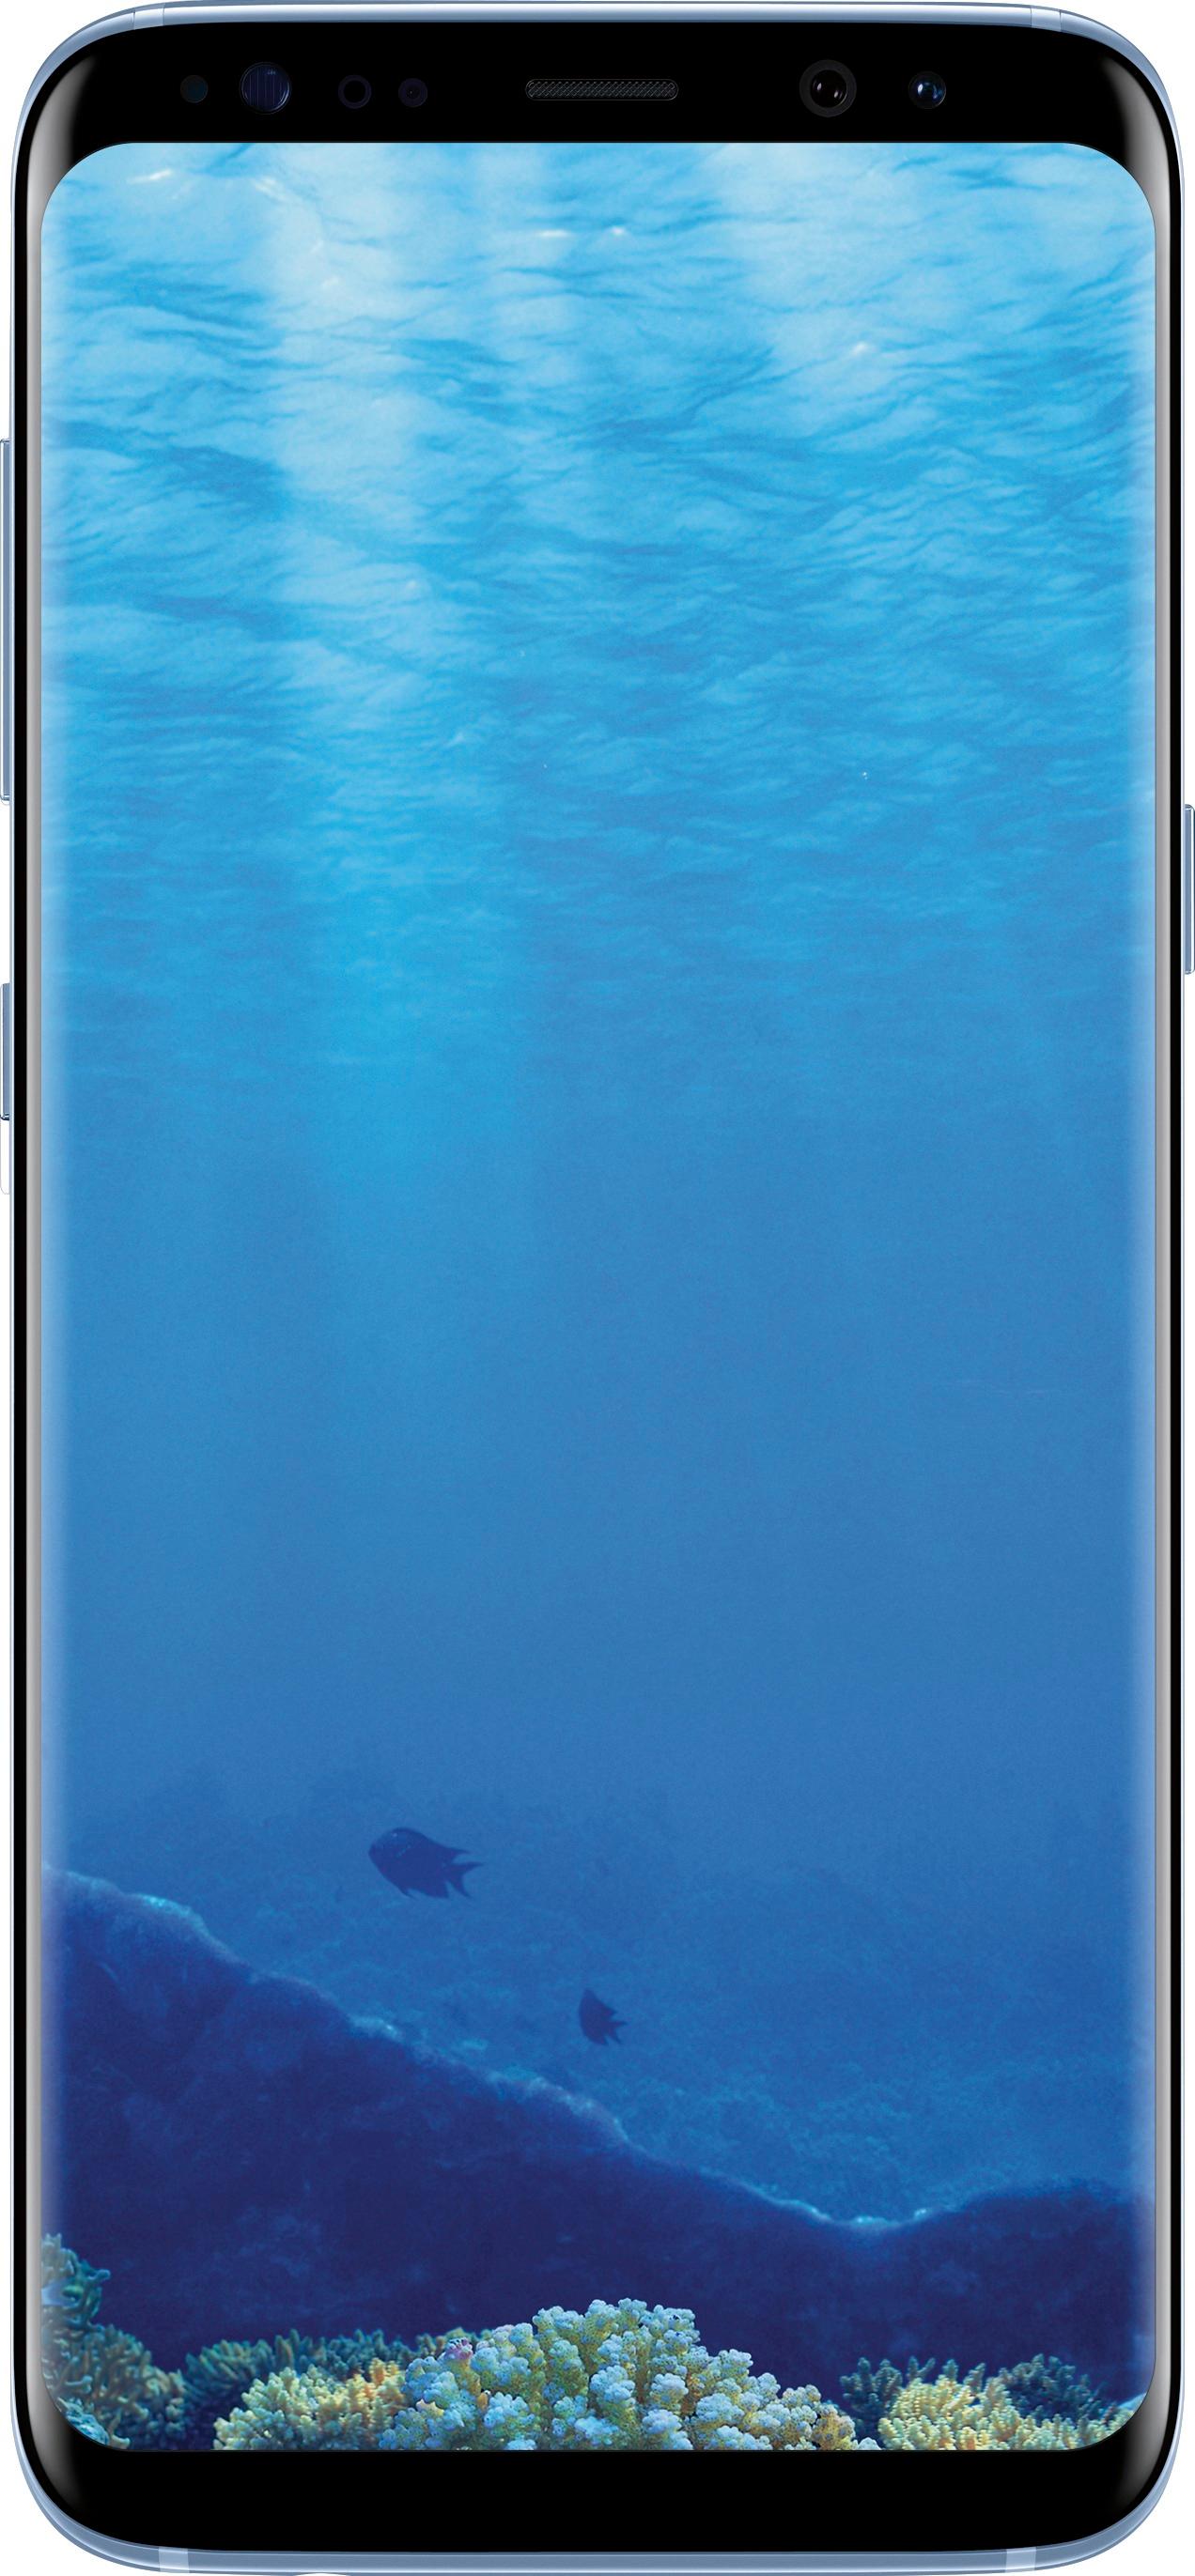 Samsung Galaxy S8 4G LTE with 64GB Memory - Best Buy